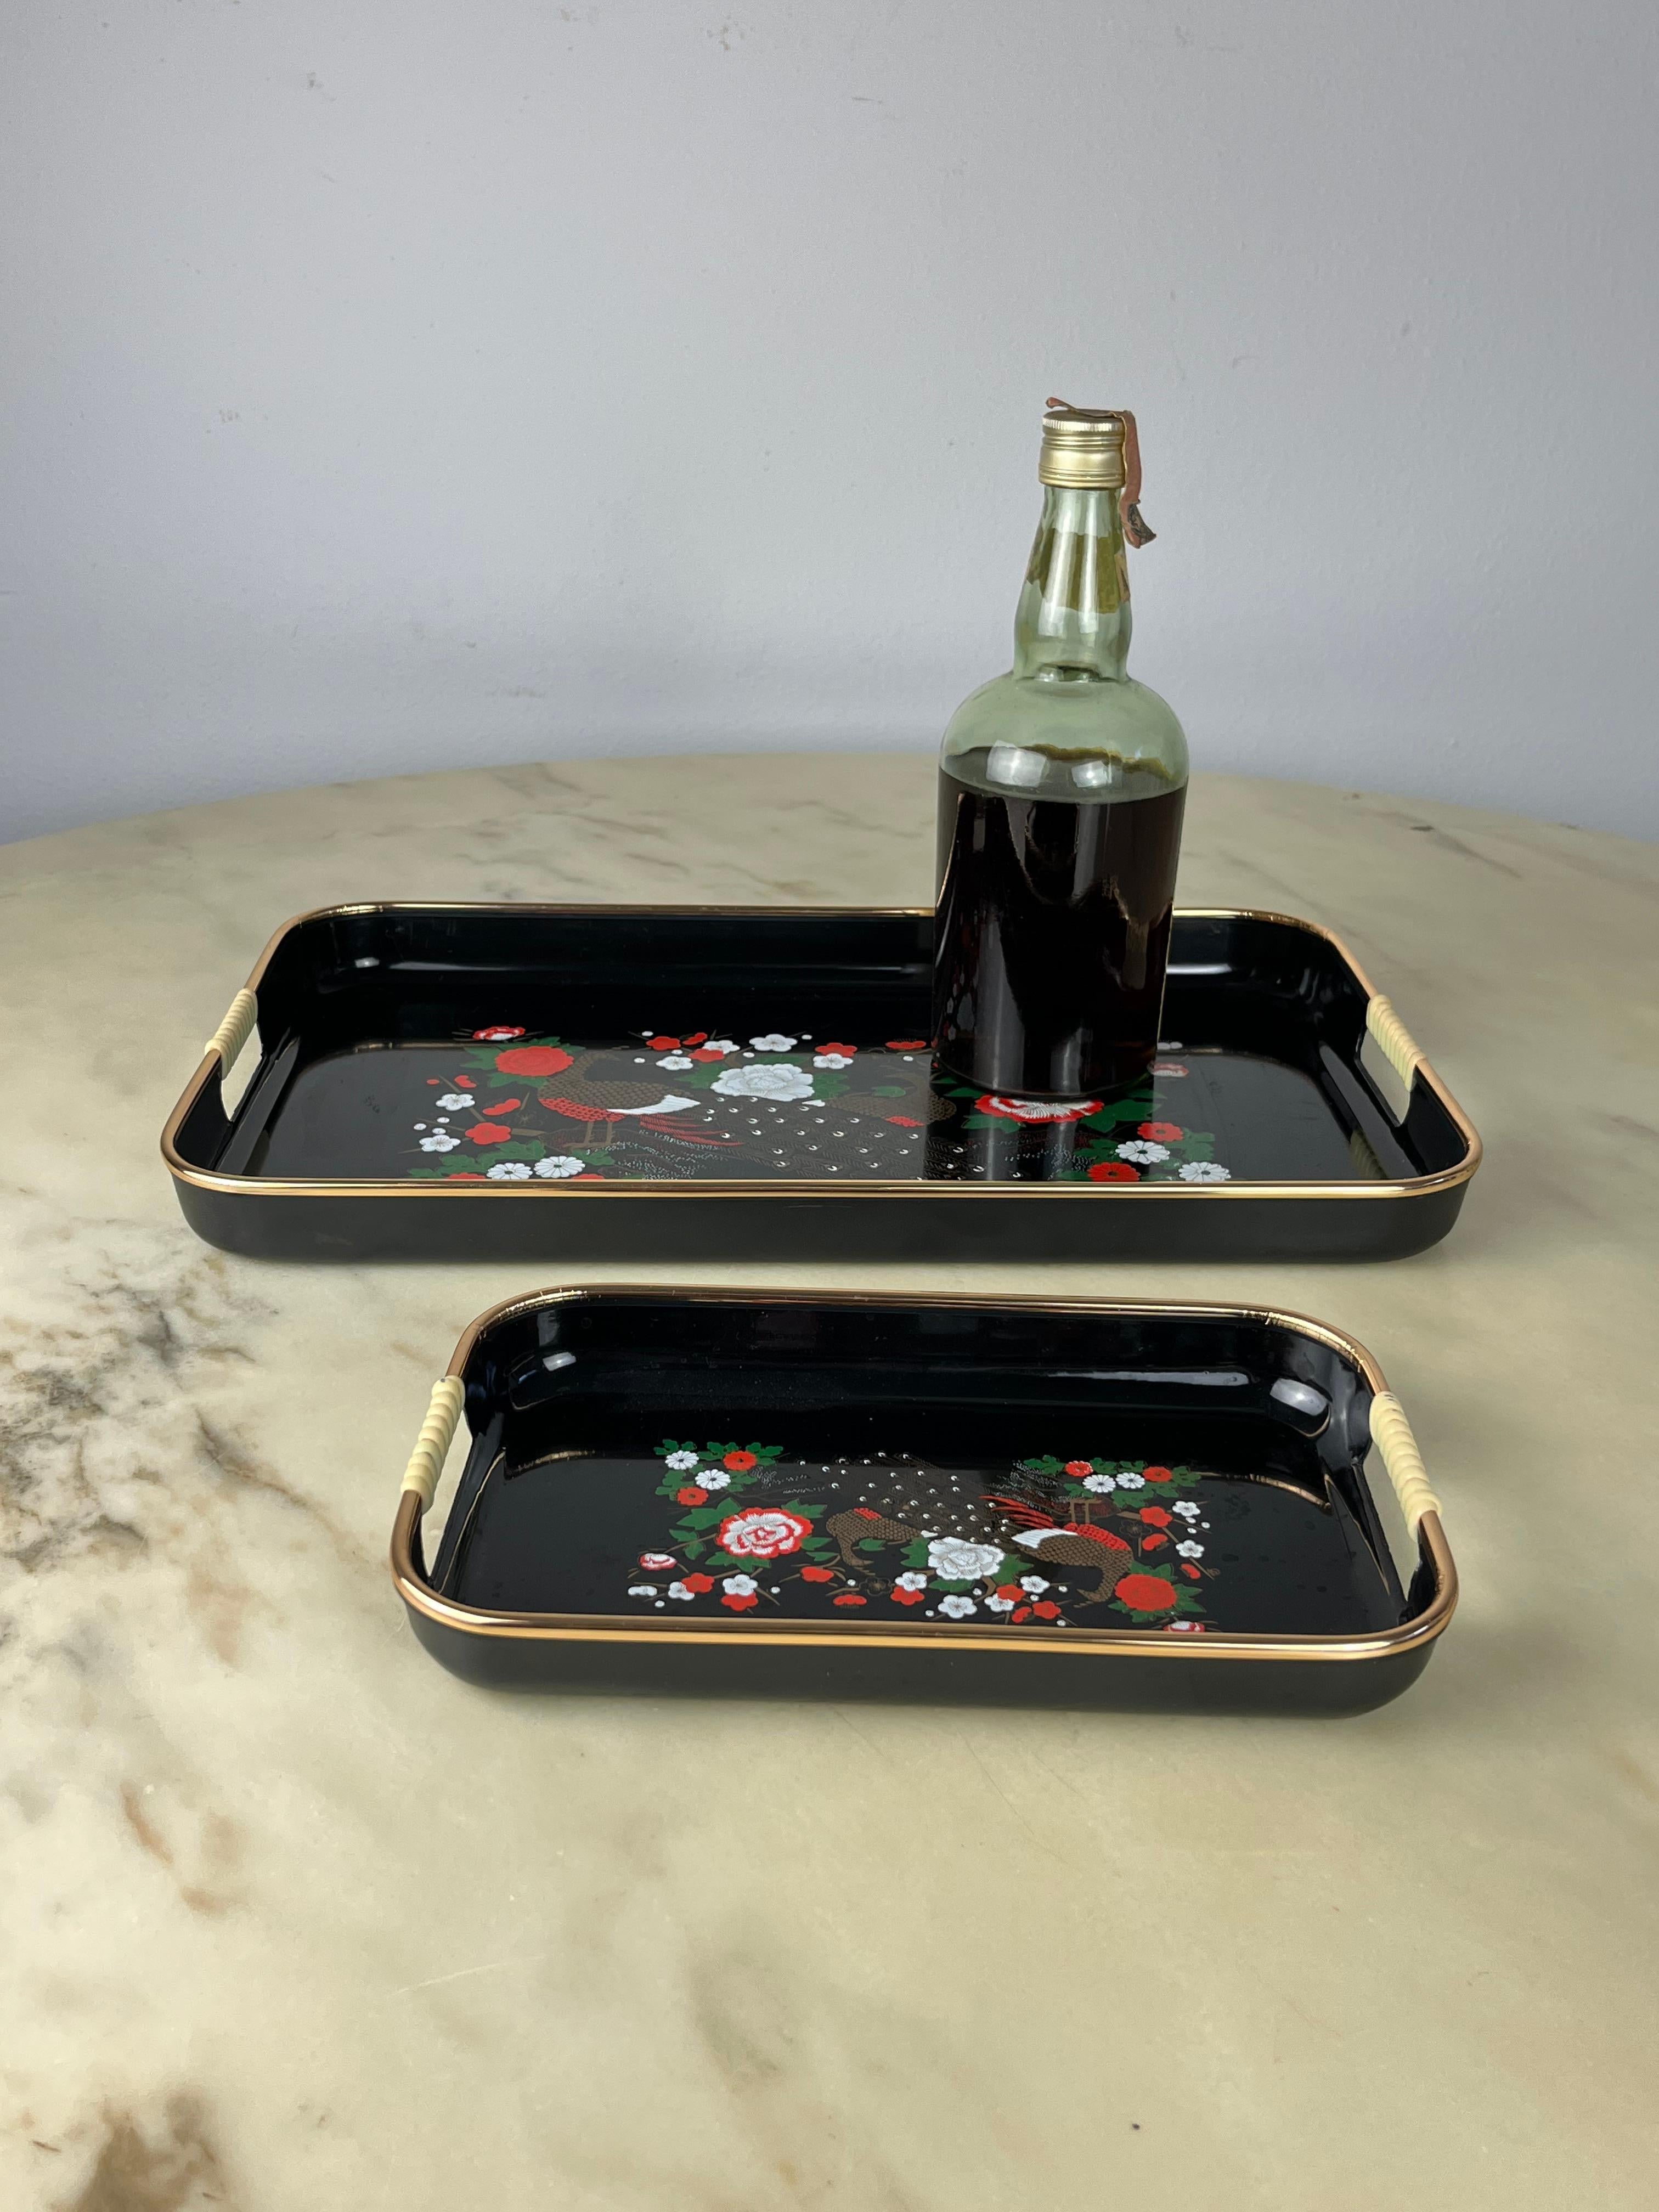 Pair of vintage oriental trays, Japan, 1970s
Found in a noble apartment, they are intact and in good condition. Small signs of aging. The largest measures 42.5 cm x 26.5 cm x 3.5 cm; The smallest 25 cm x 15 cm x 3 cm.